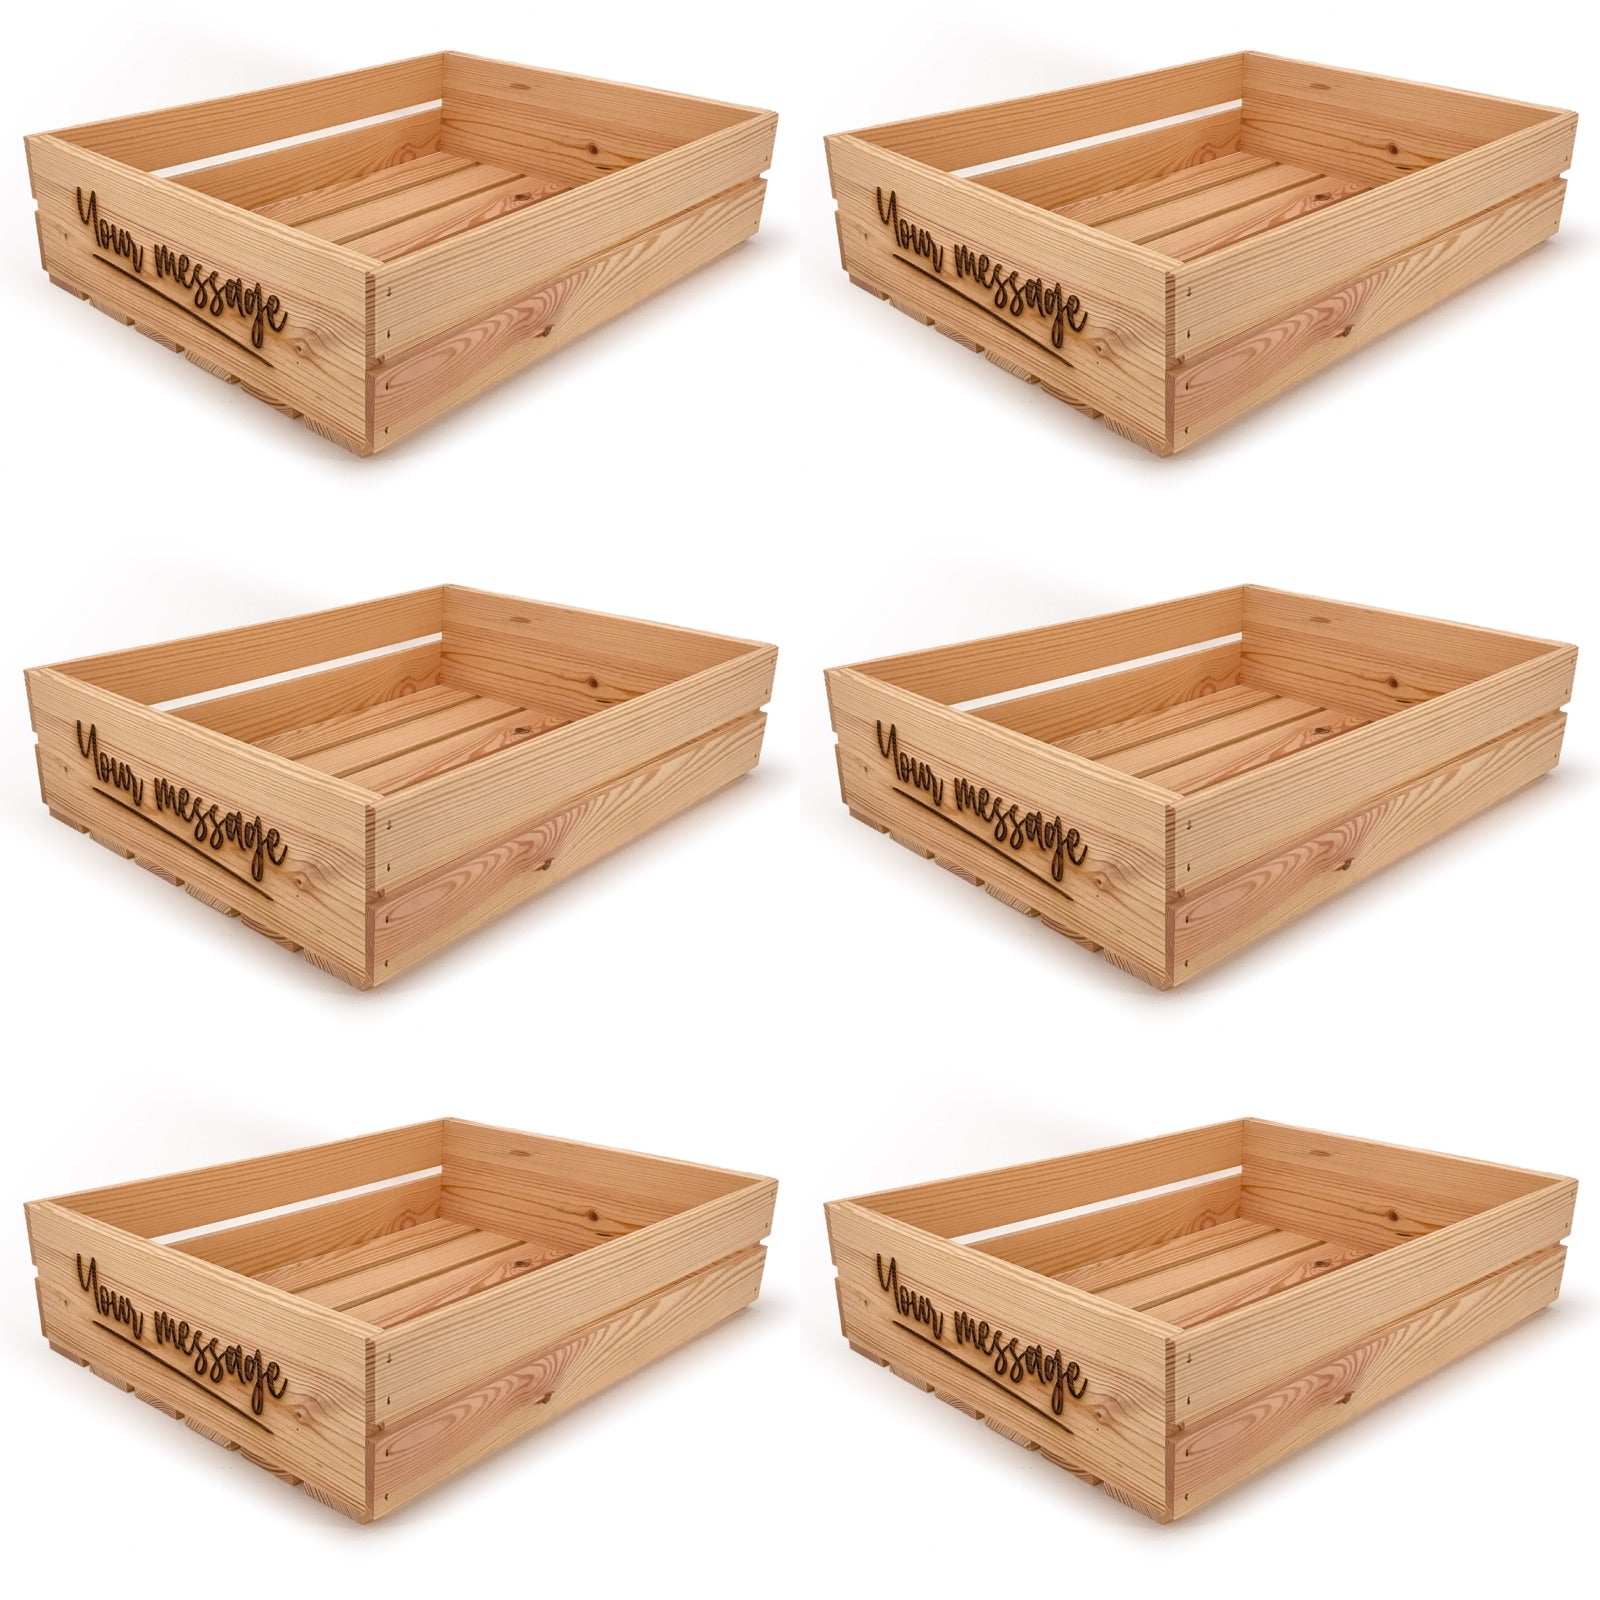 6 Small wooden crates with custom message 22x17x5.25